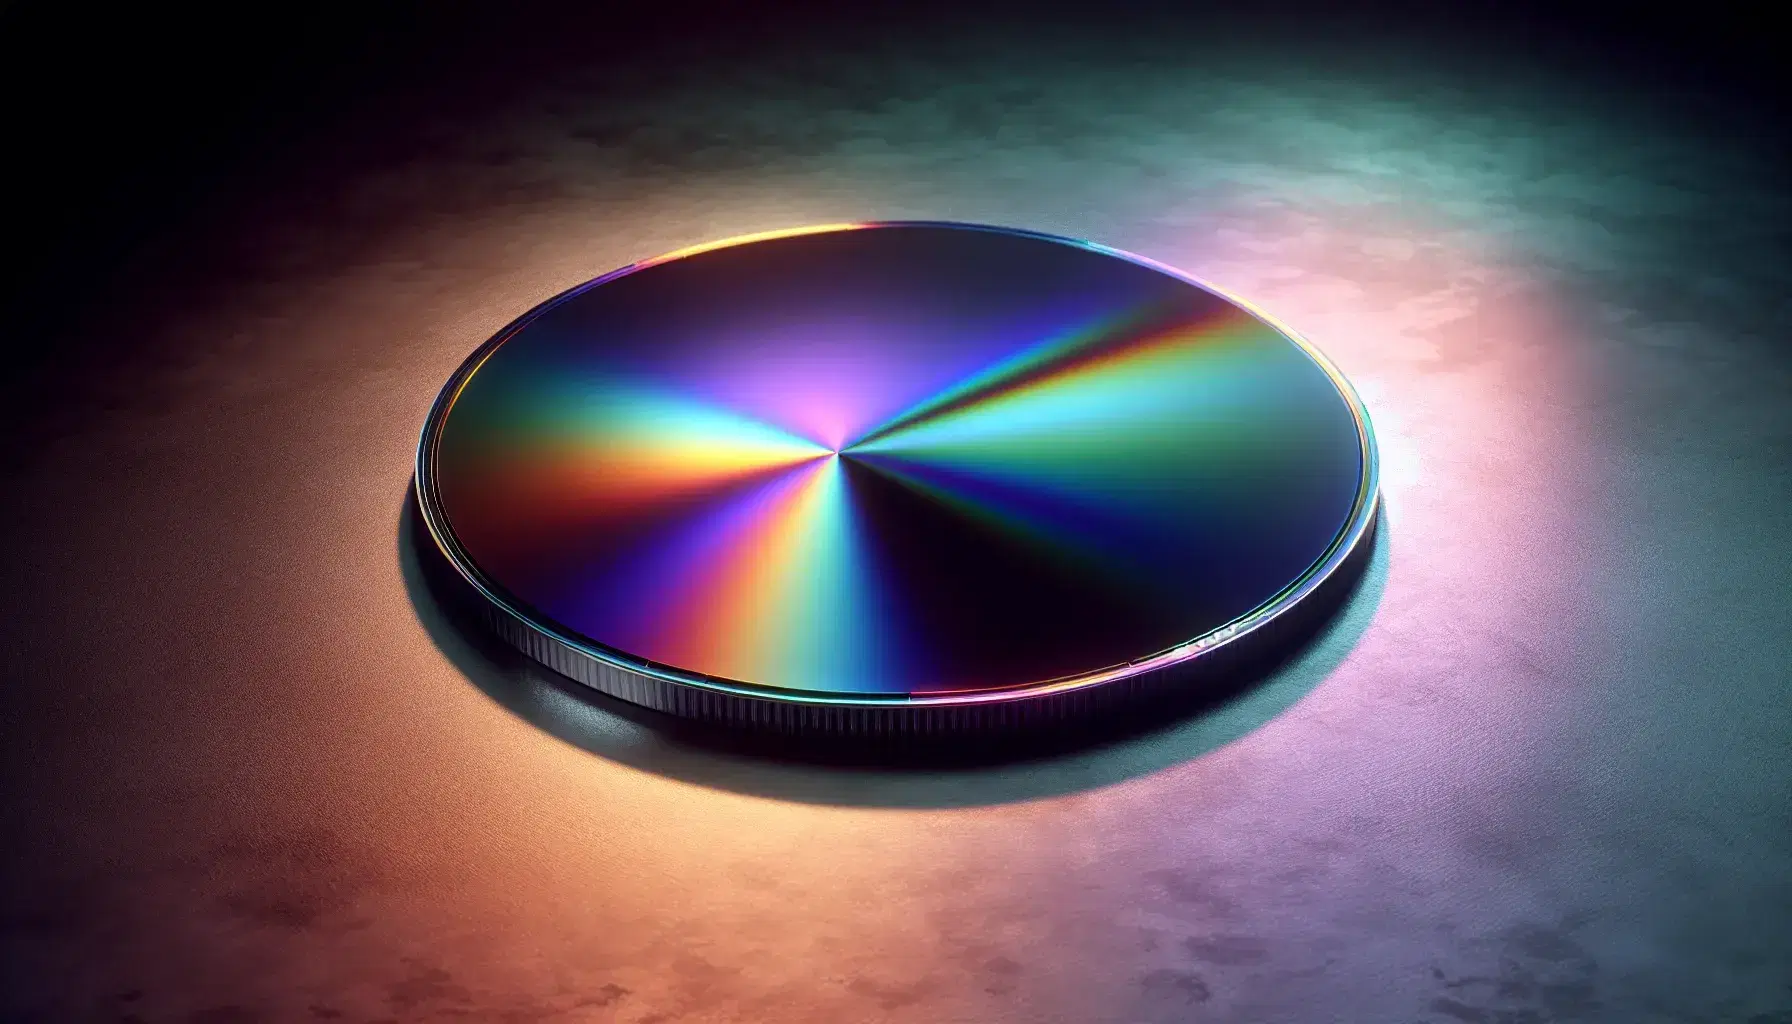 Close-up of a circular semiconductor wafer with reflective surface showing a rainbow of colors on a dark background.